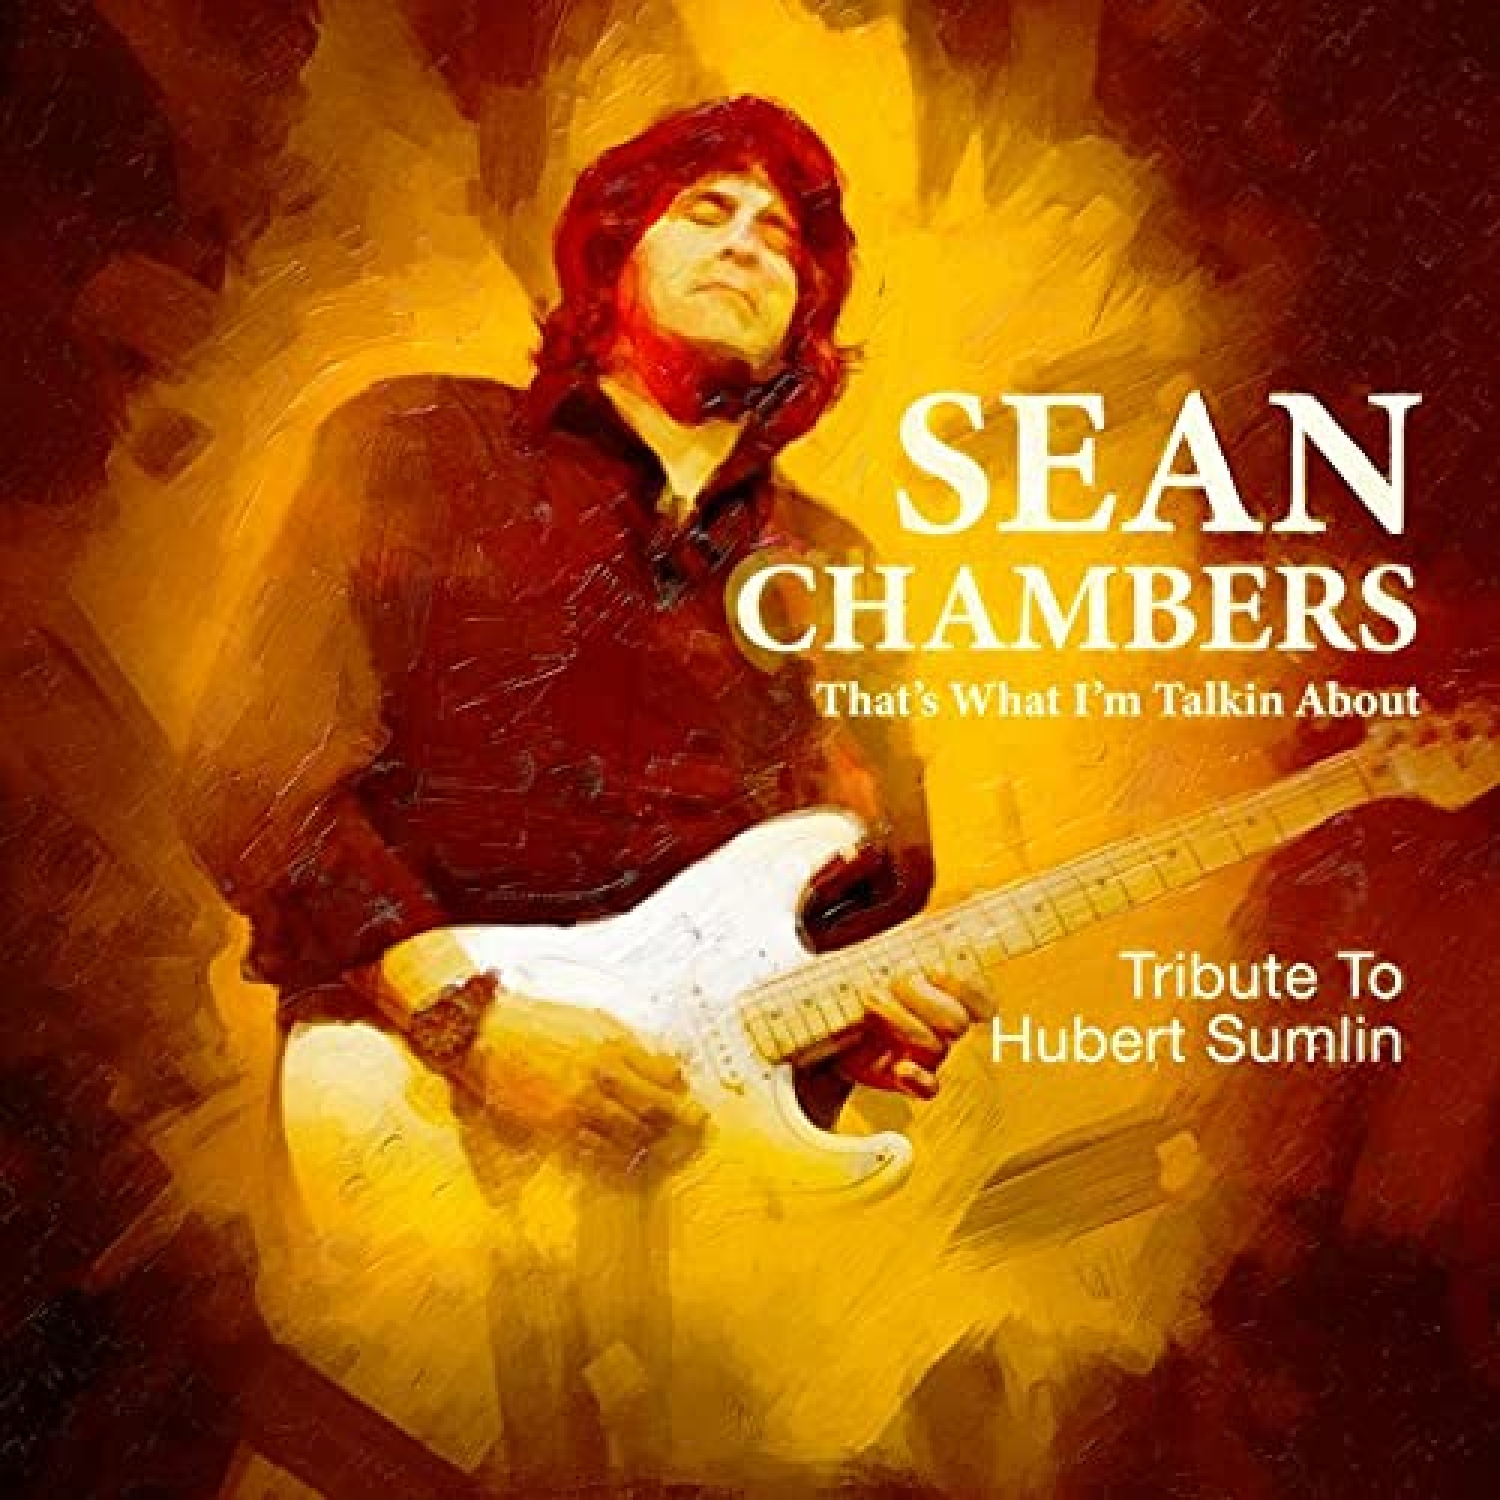 Review: Sean Chambers - That's What I'm Talkin About - Tribute to Hubert Sumlin